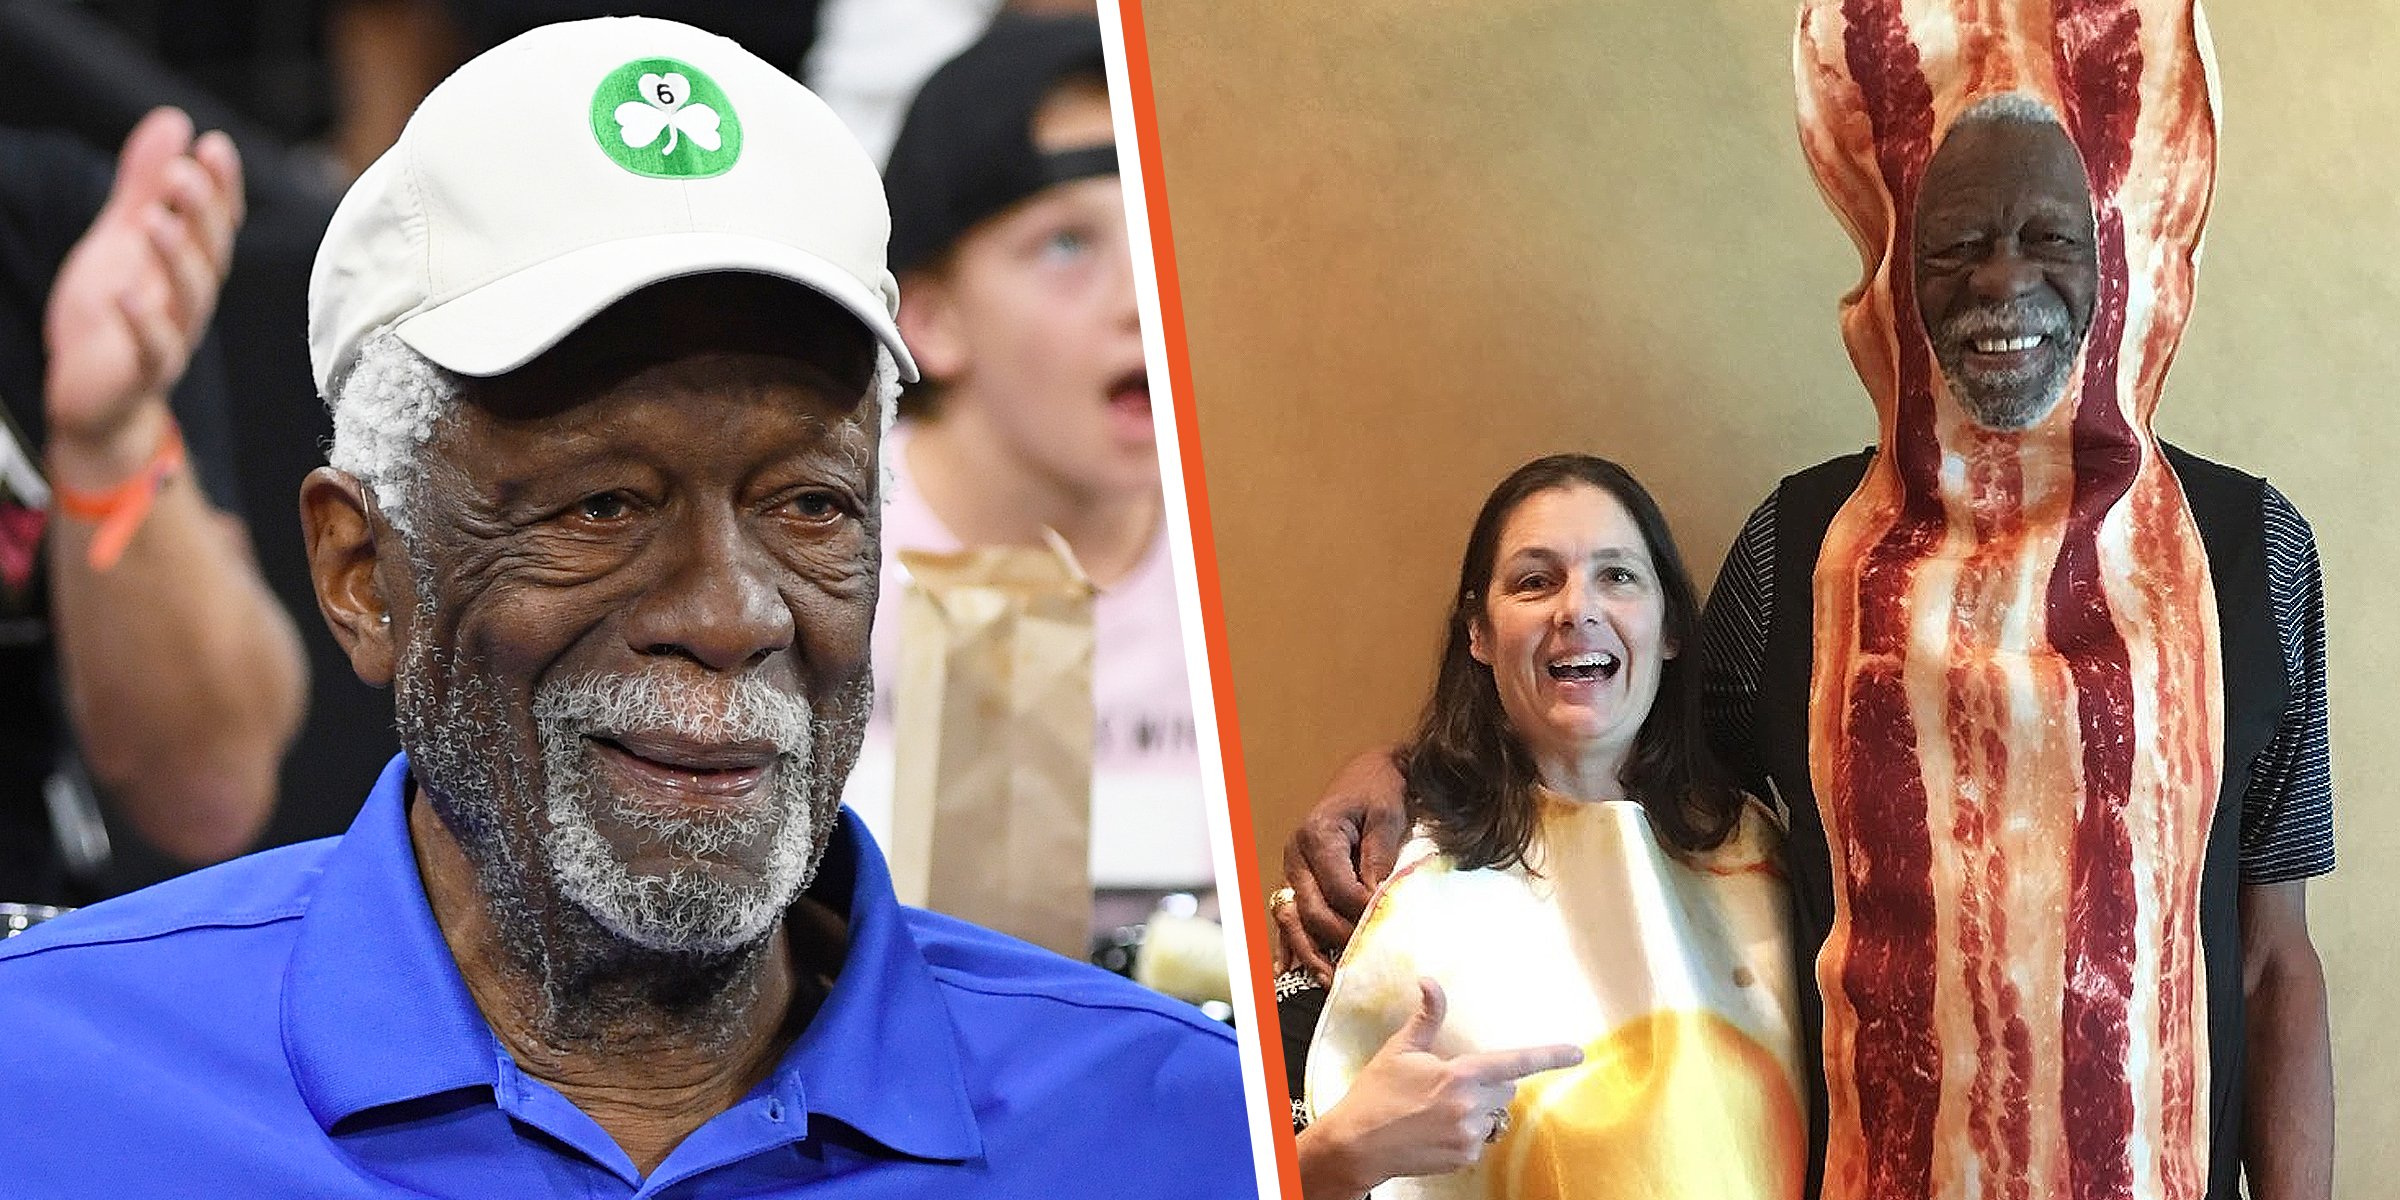 Bill Russell's Wife Jeannine Russell Is a Former Pro Golfer - Facts about Her Life and Marriage